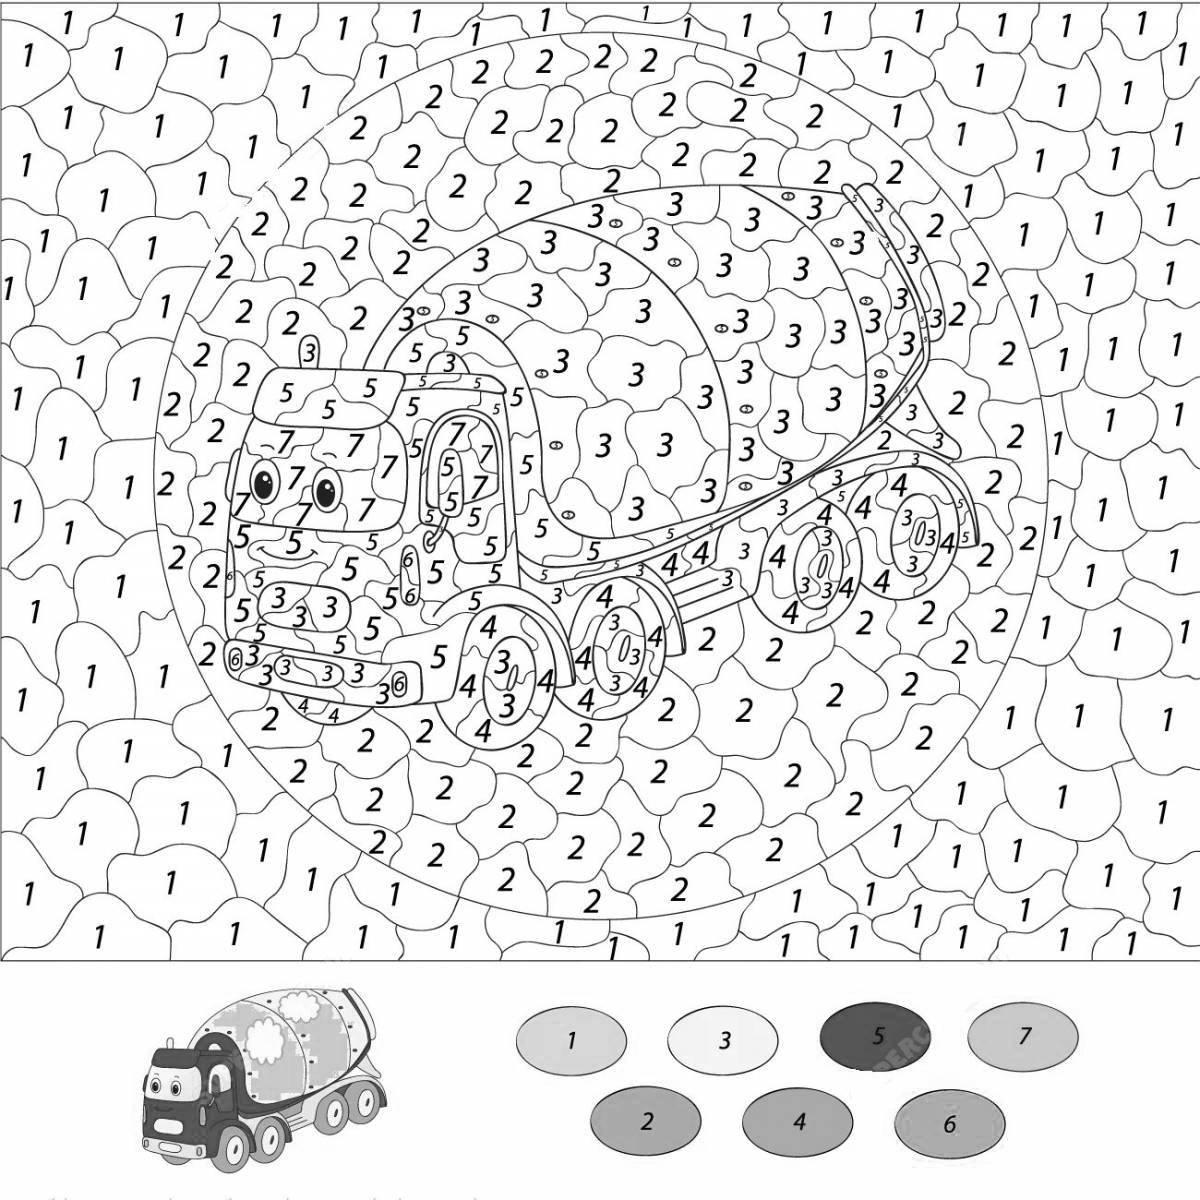 Creative coloring game by numbers in contact